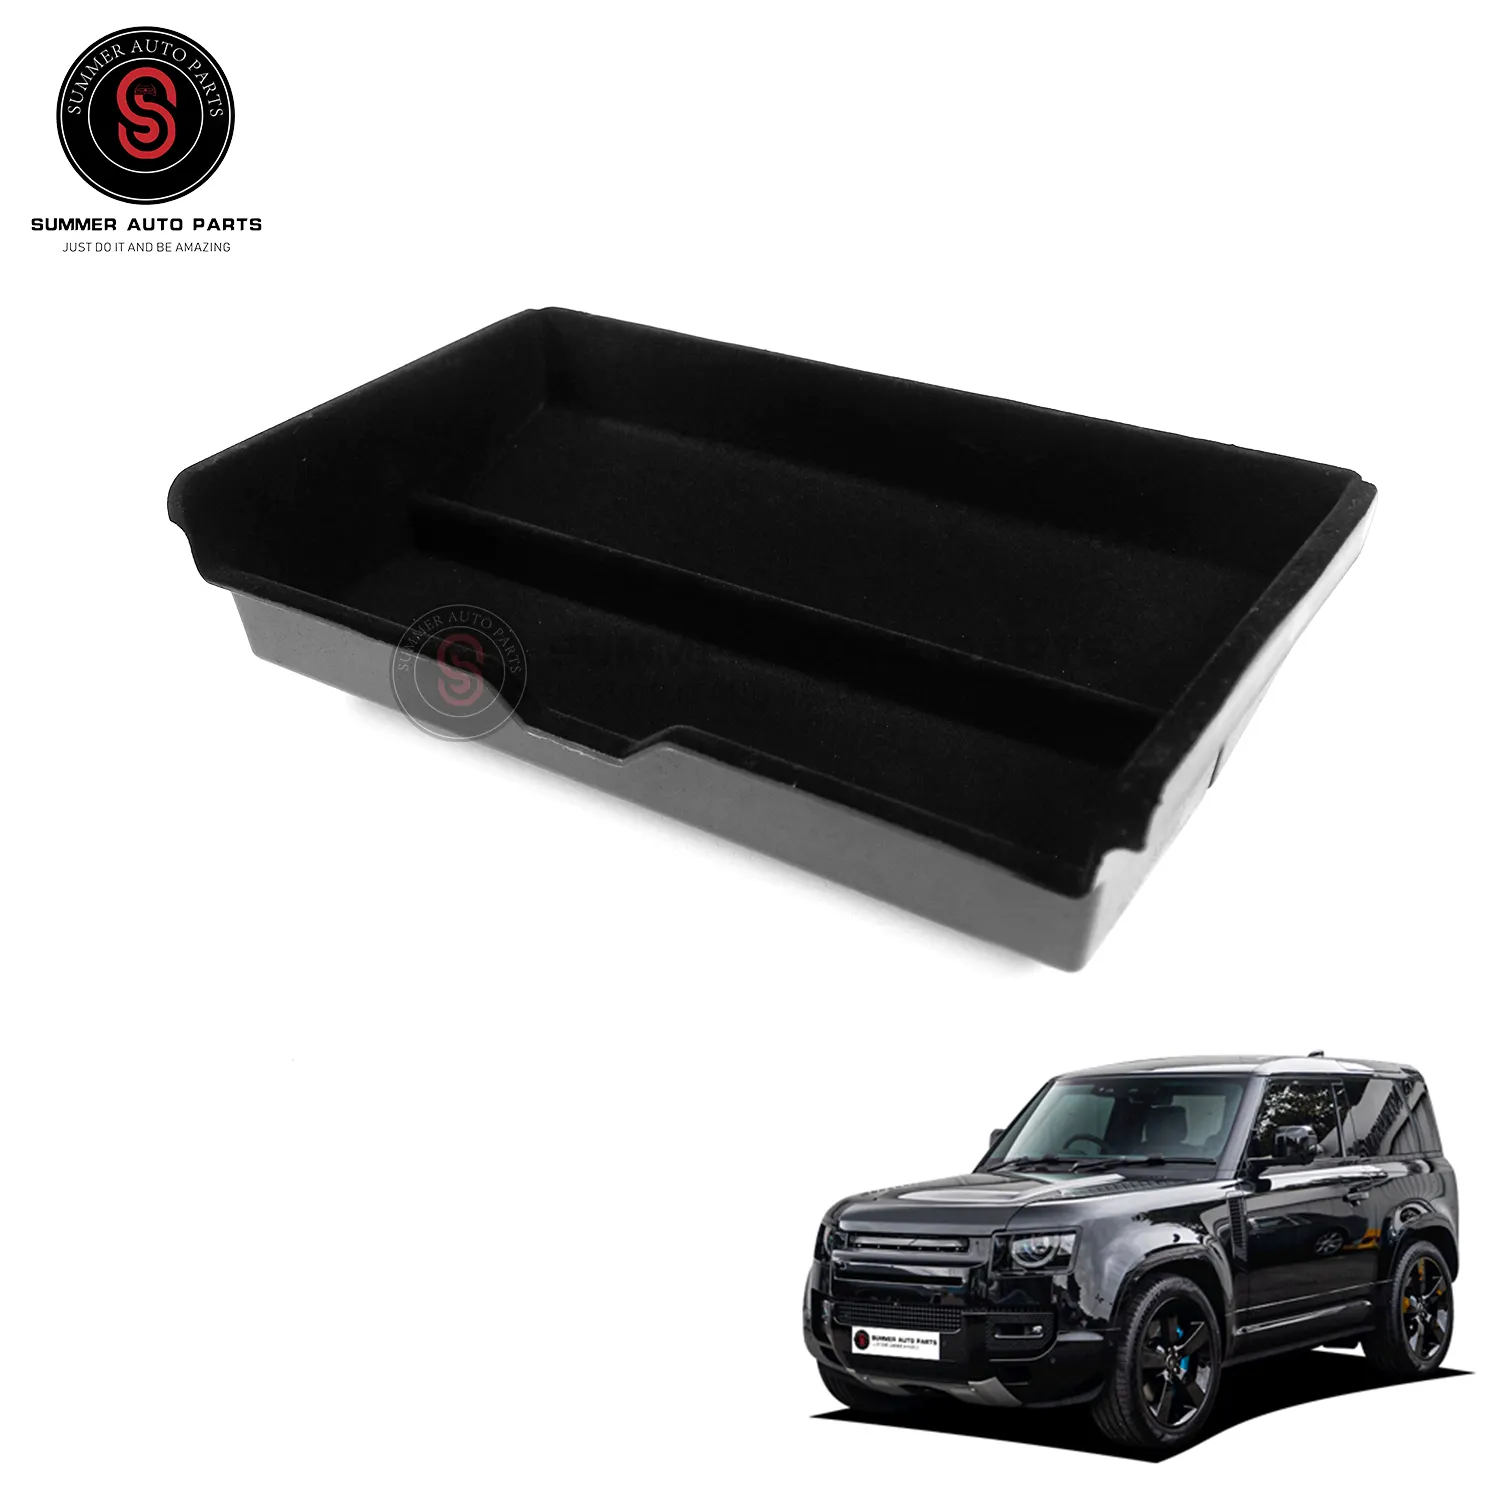 DEF4X4 CENTER CONSOLE DOWN STORAGE BOX (FLOCKING) Seat Gap Storage Cover For Land Rover New Defender 2020-2022 90/110